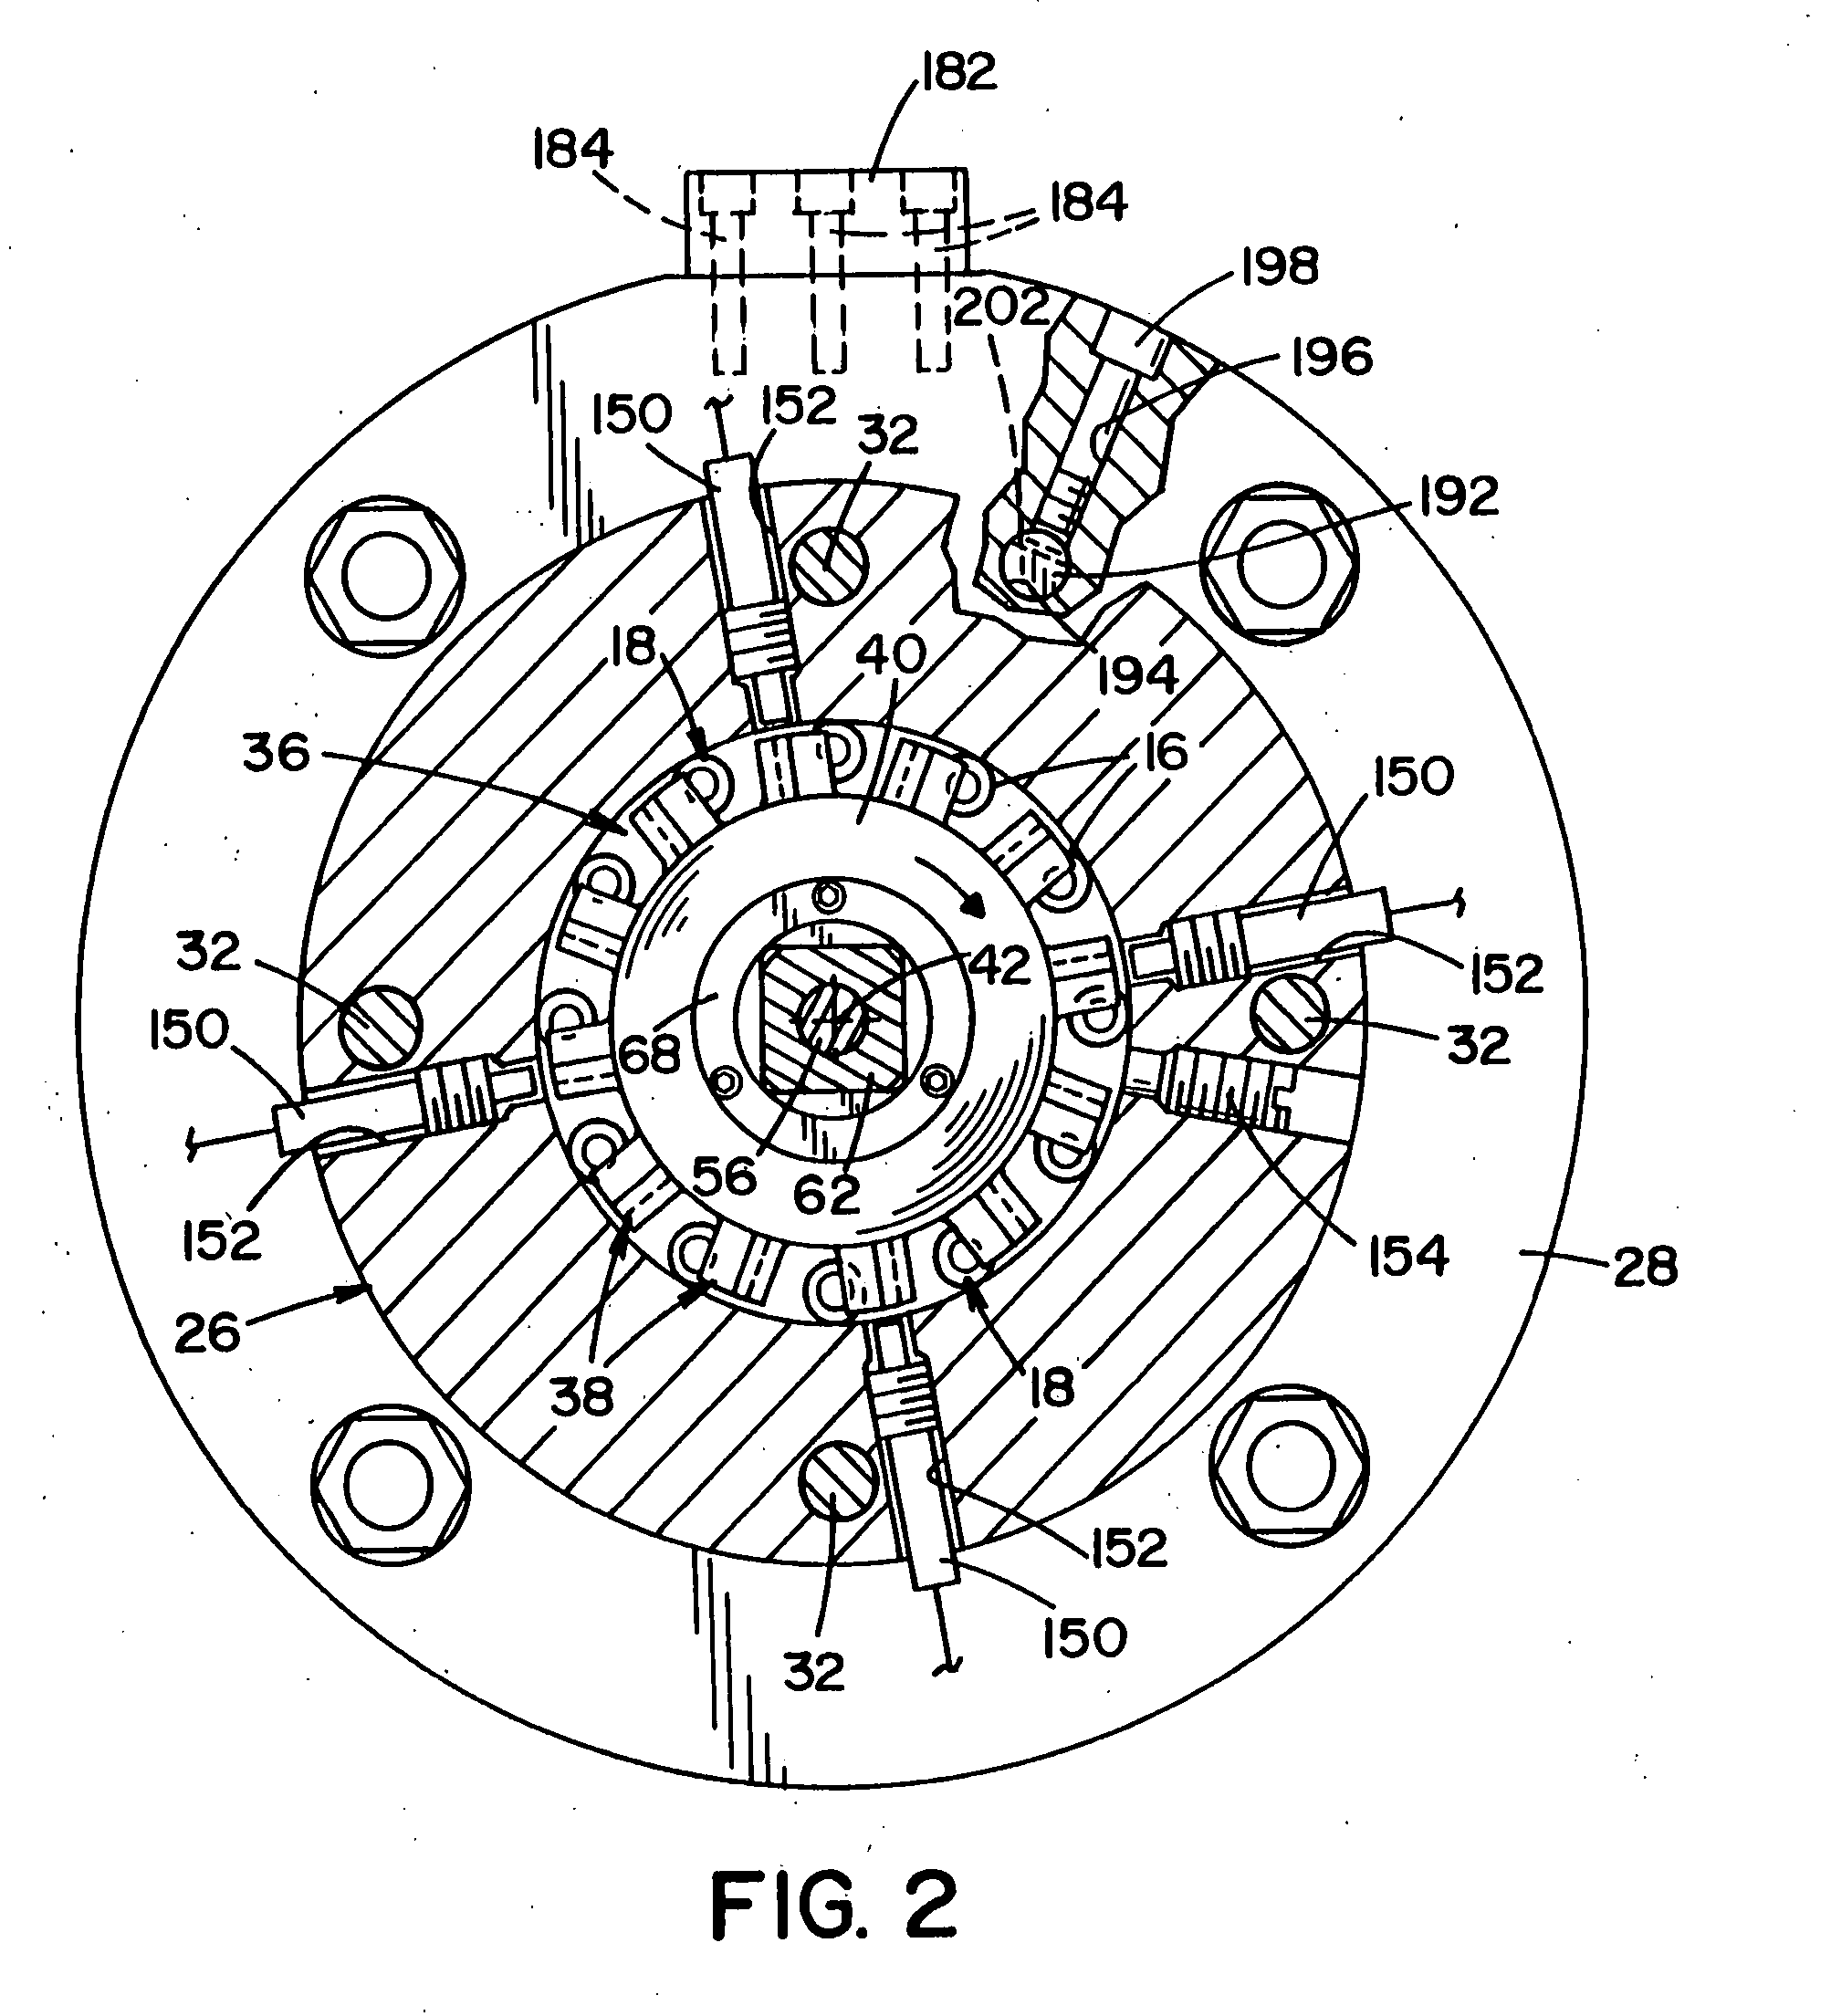 Extruder system and cutting assembly